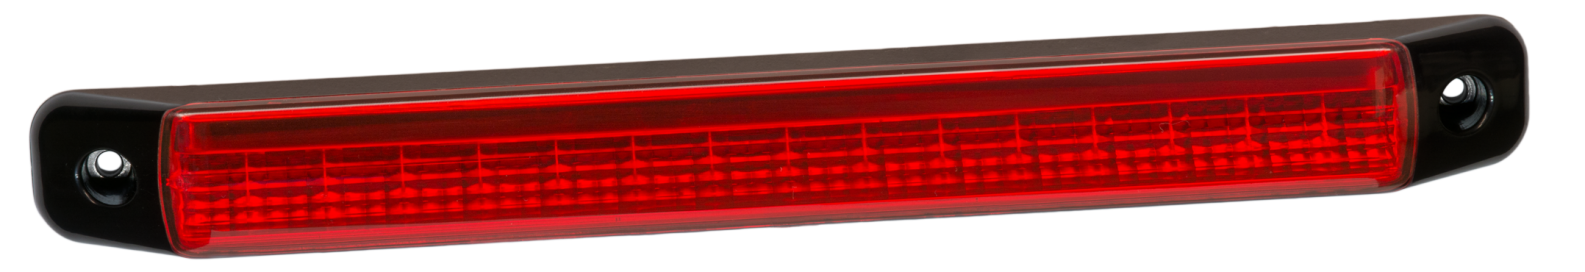 Kit: Aspöck Multipoint II rear lights, Superpoint II side marker lights  with 8 m 13-pin wiring harness and 2x quick-splice connectors